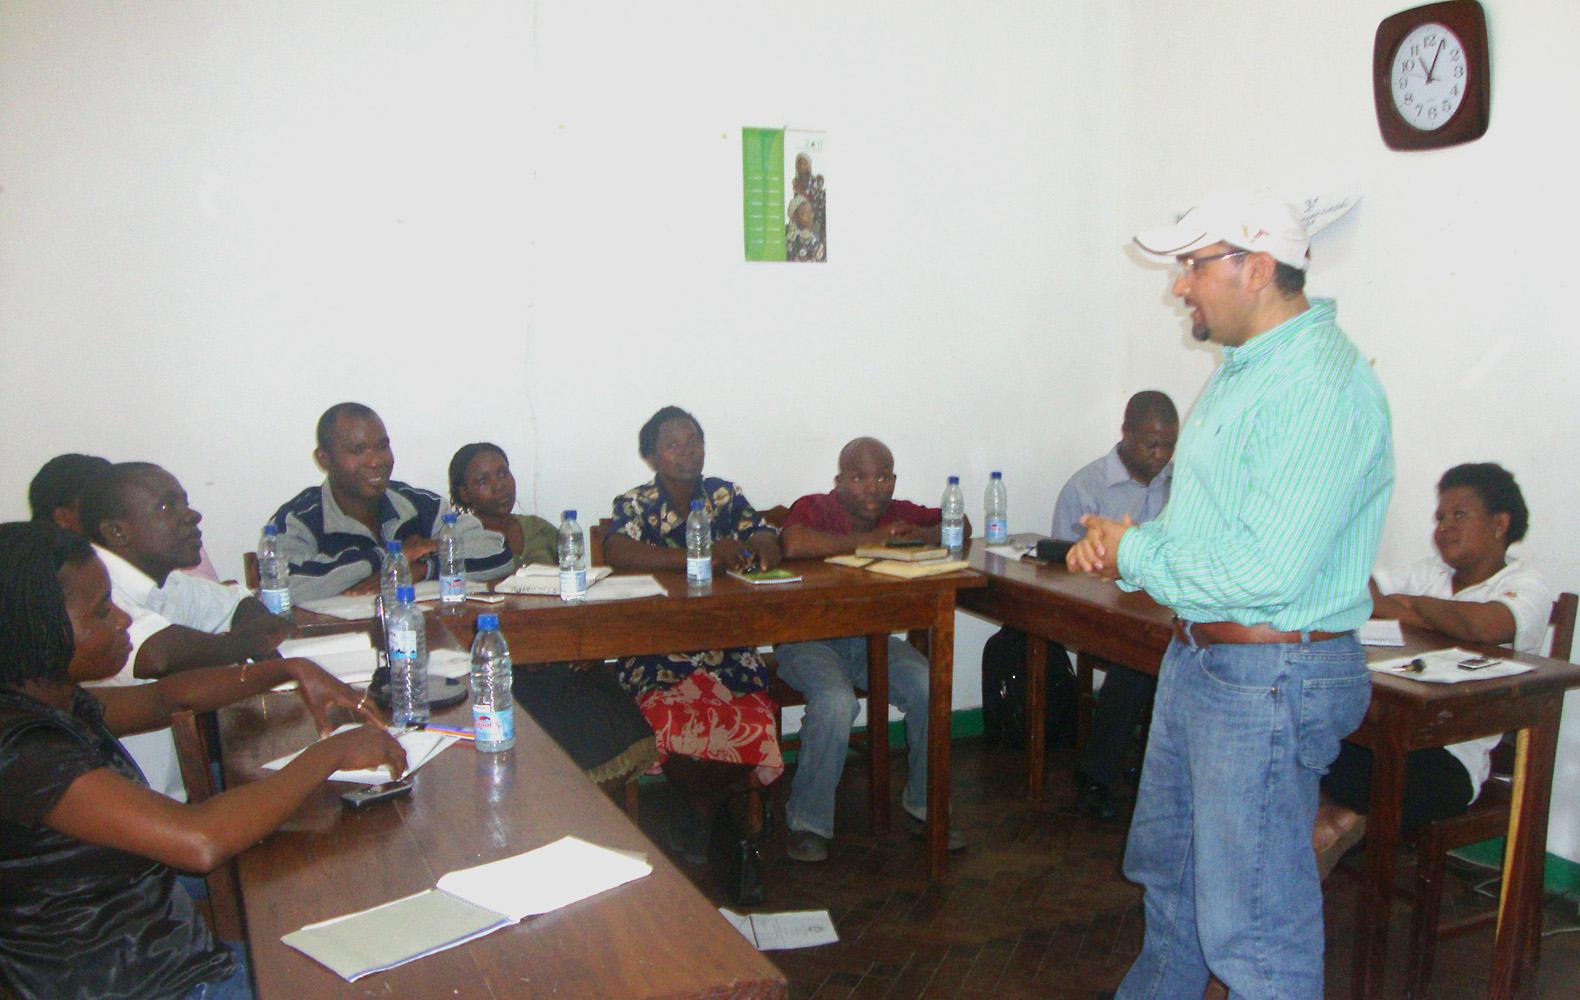 Barakat Mahmoud, an Extension research professor with Mississippi State University, recently spent three weeks teaching food preservation methods to 13 agriculture agents in Mozambique, Africa. (Submitted Photo)